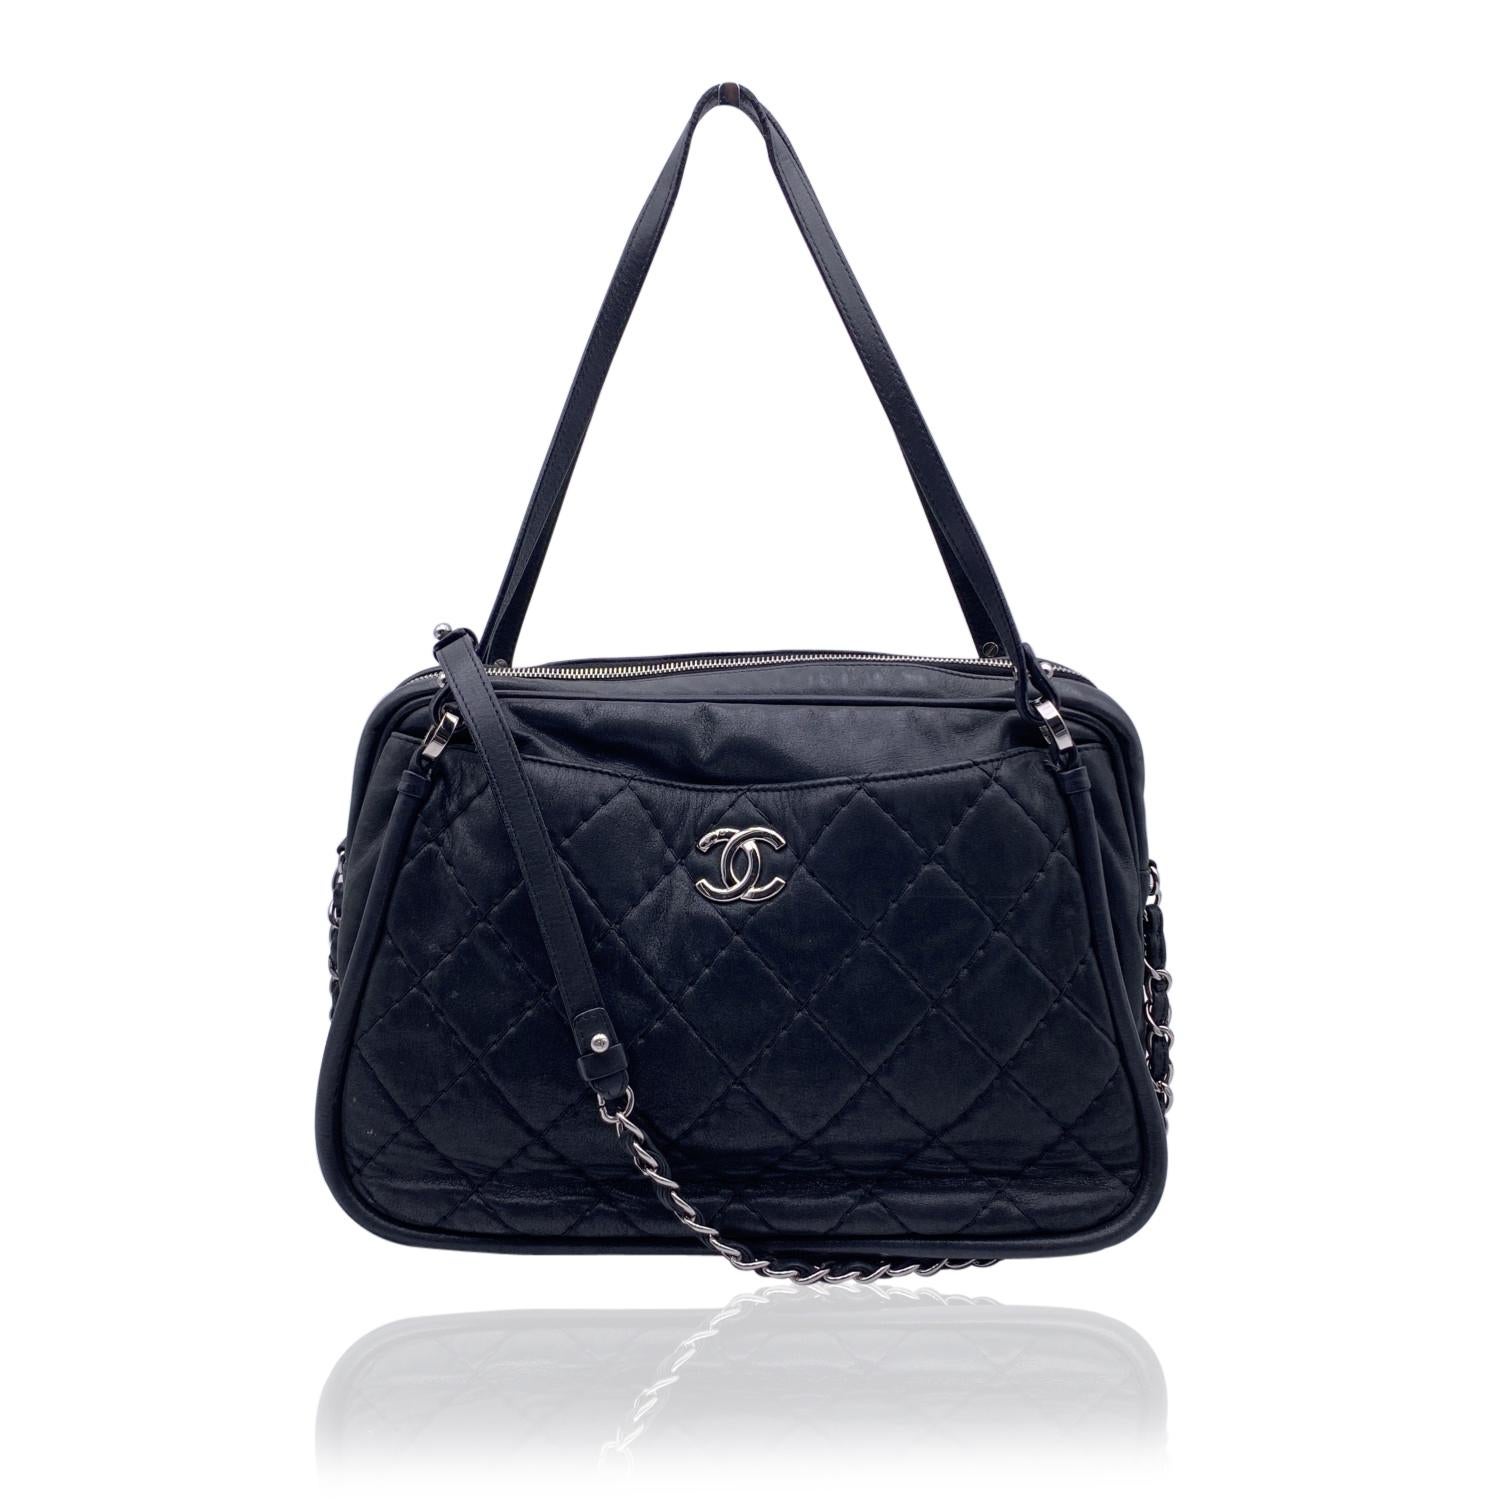 Chanel Black Quilted Leather Relax CC Tote Camera Shoulder Bag 6